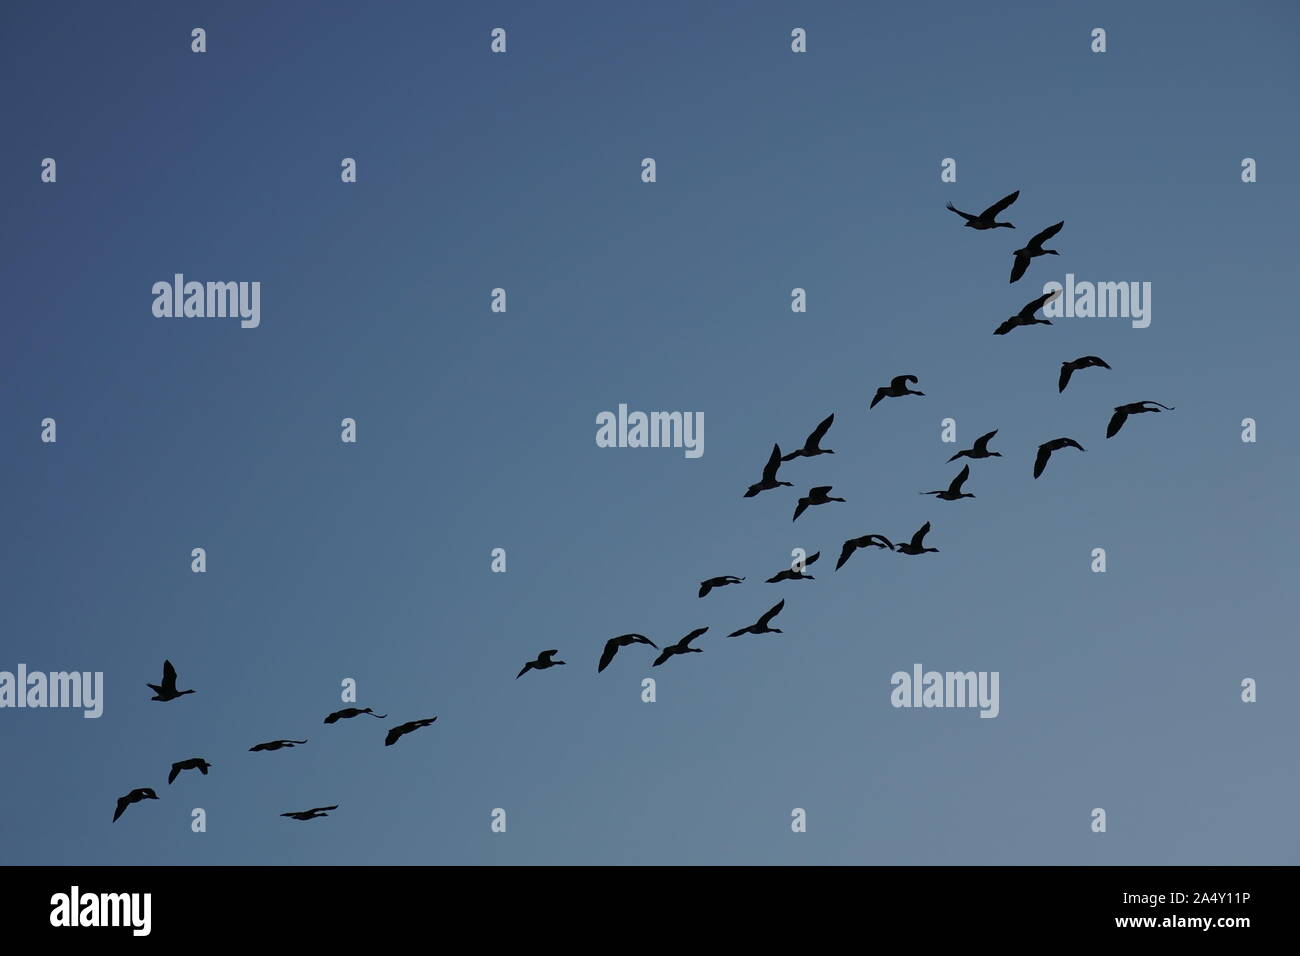 Arlington, VA / USA - September 19, 2019: Flock of birds migrating south for the cold months ahead Stock Photo